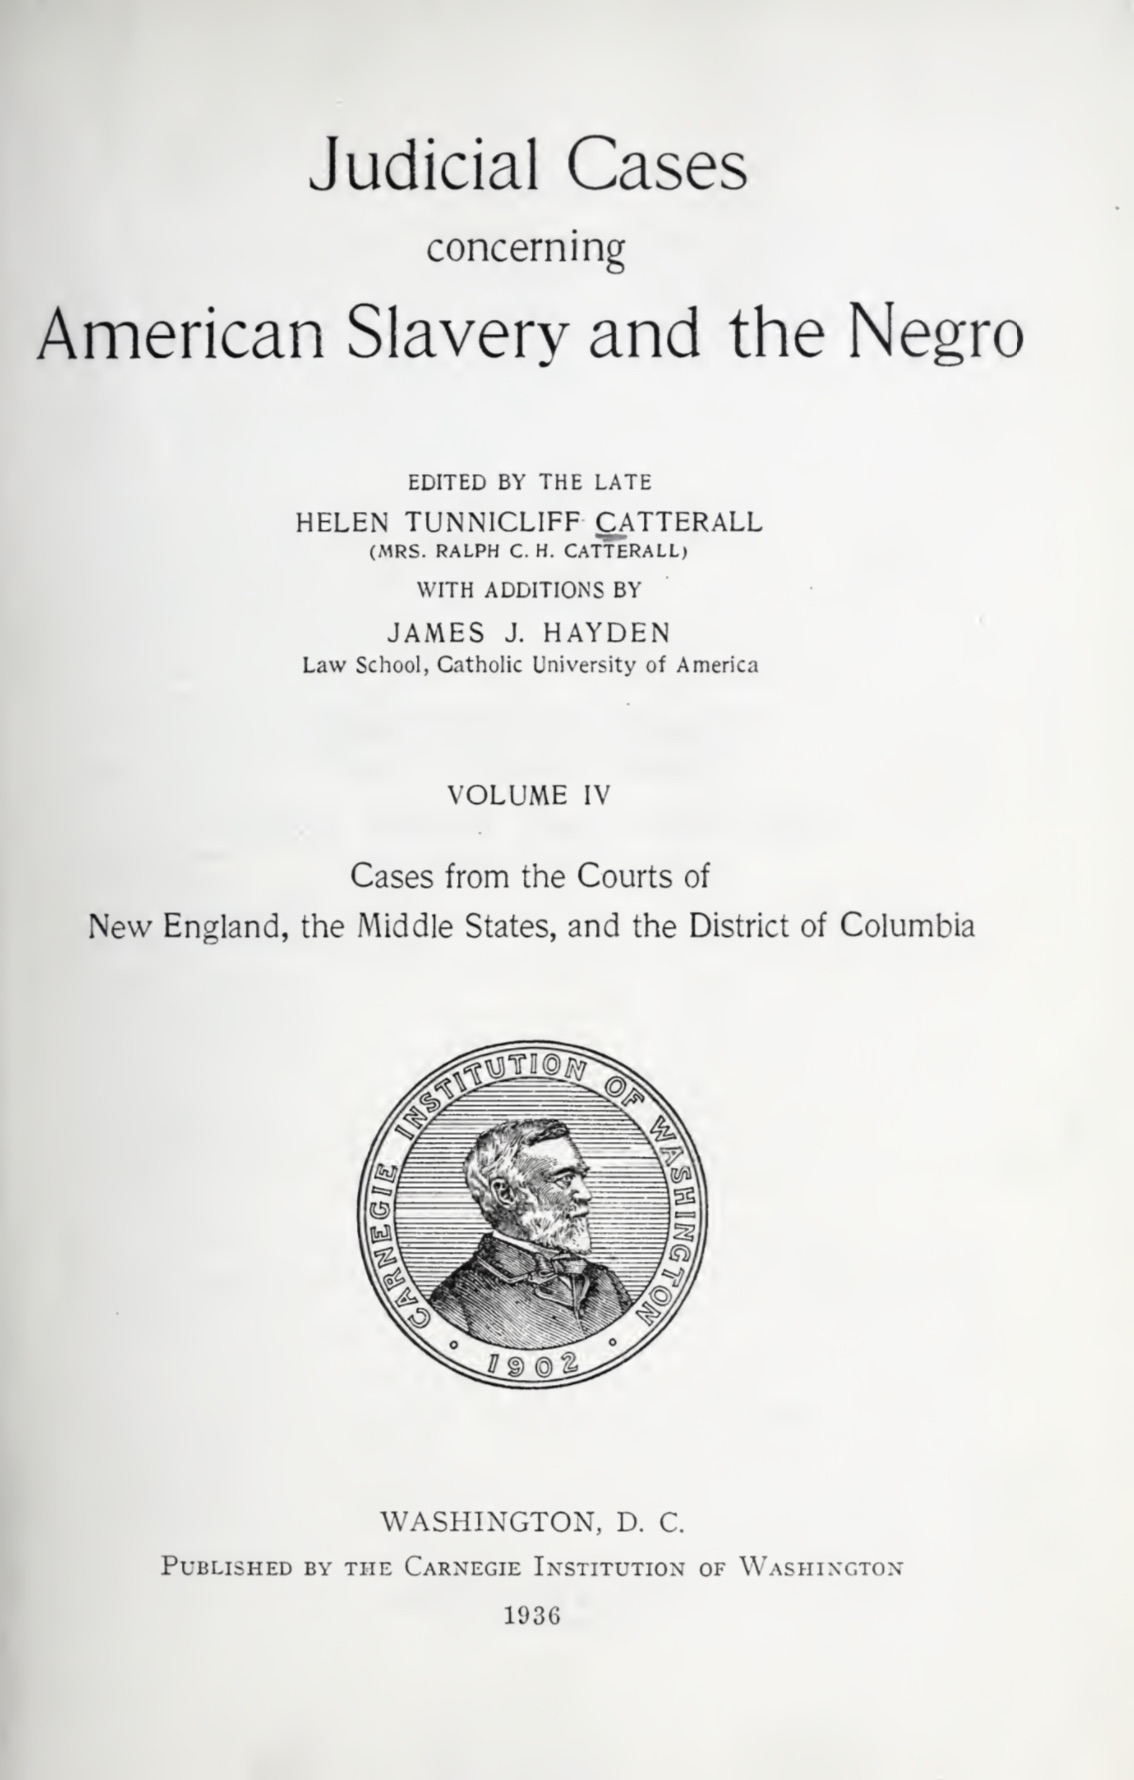 Judicial cases concerning American slavery and the Negro - Volume IV Cover